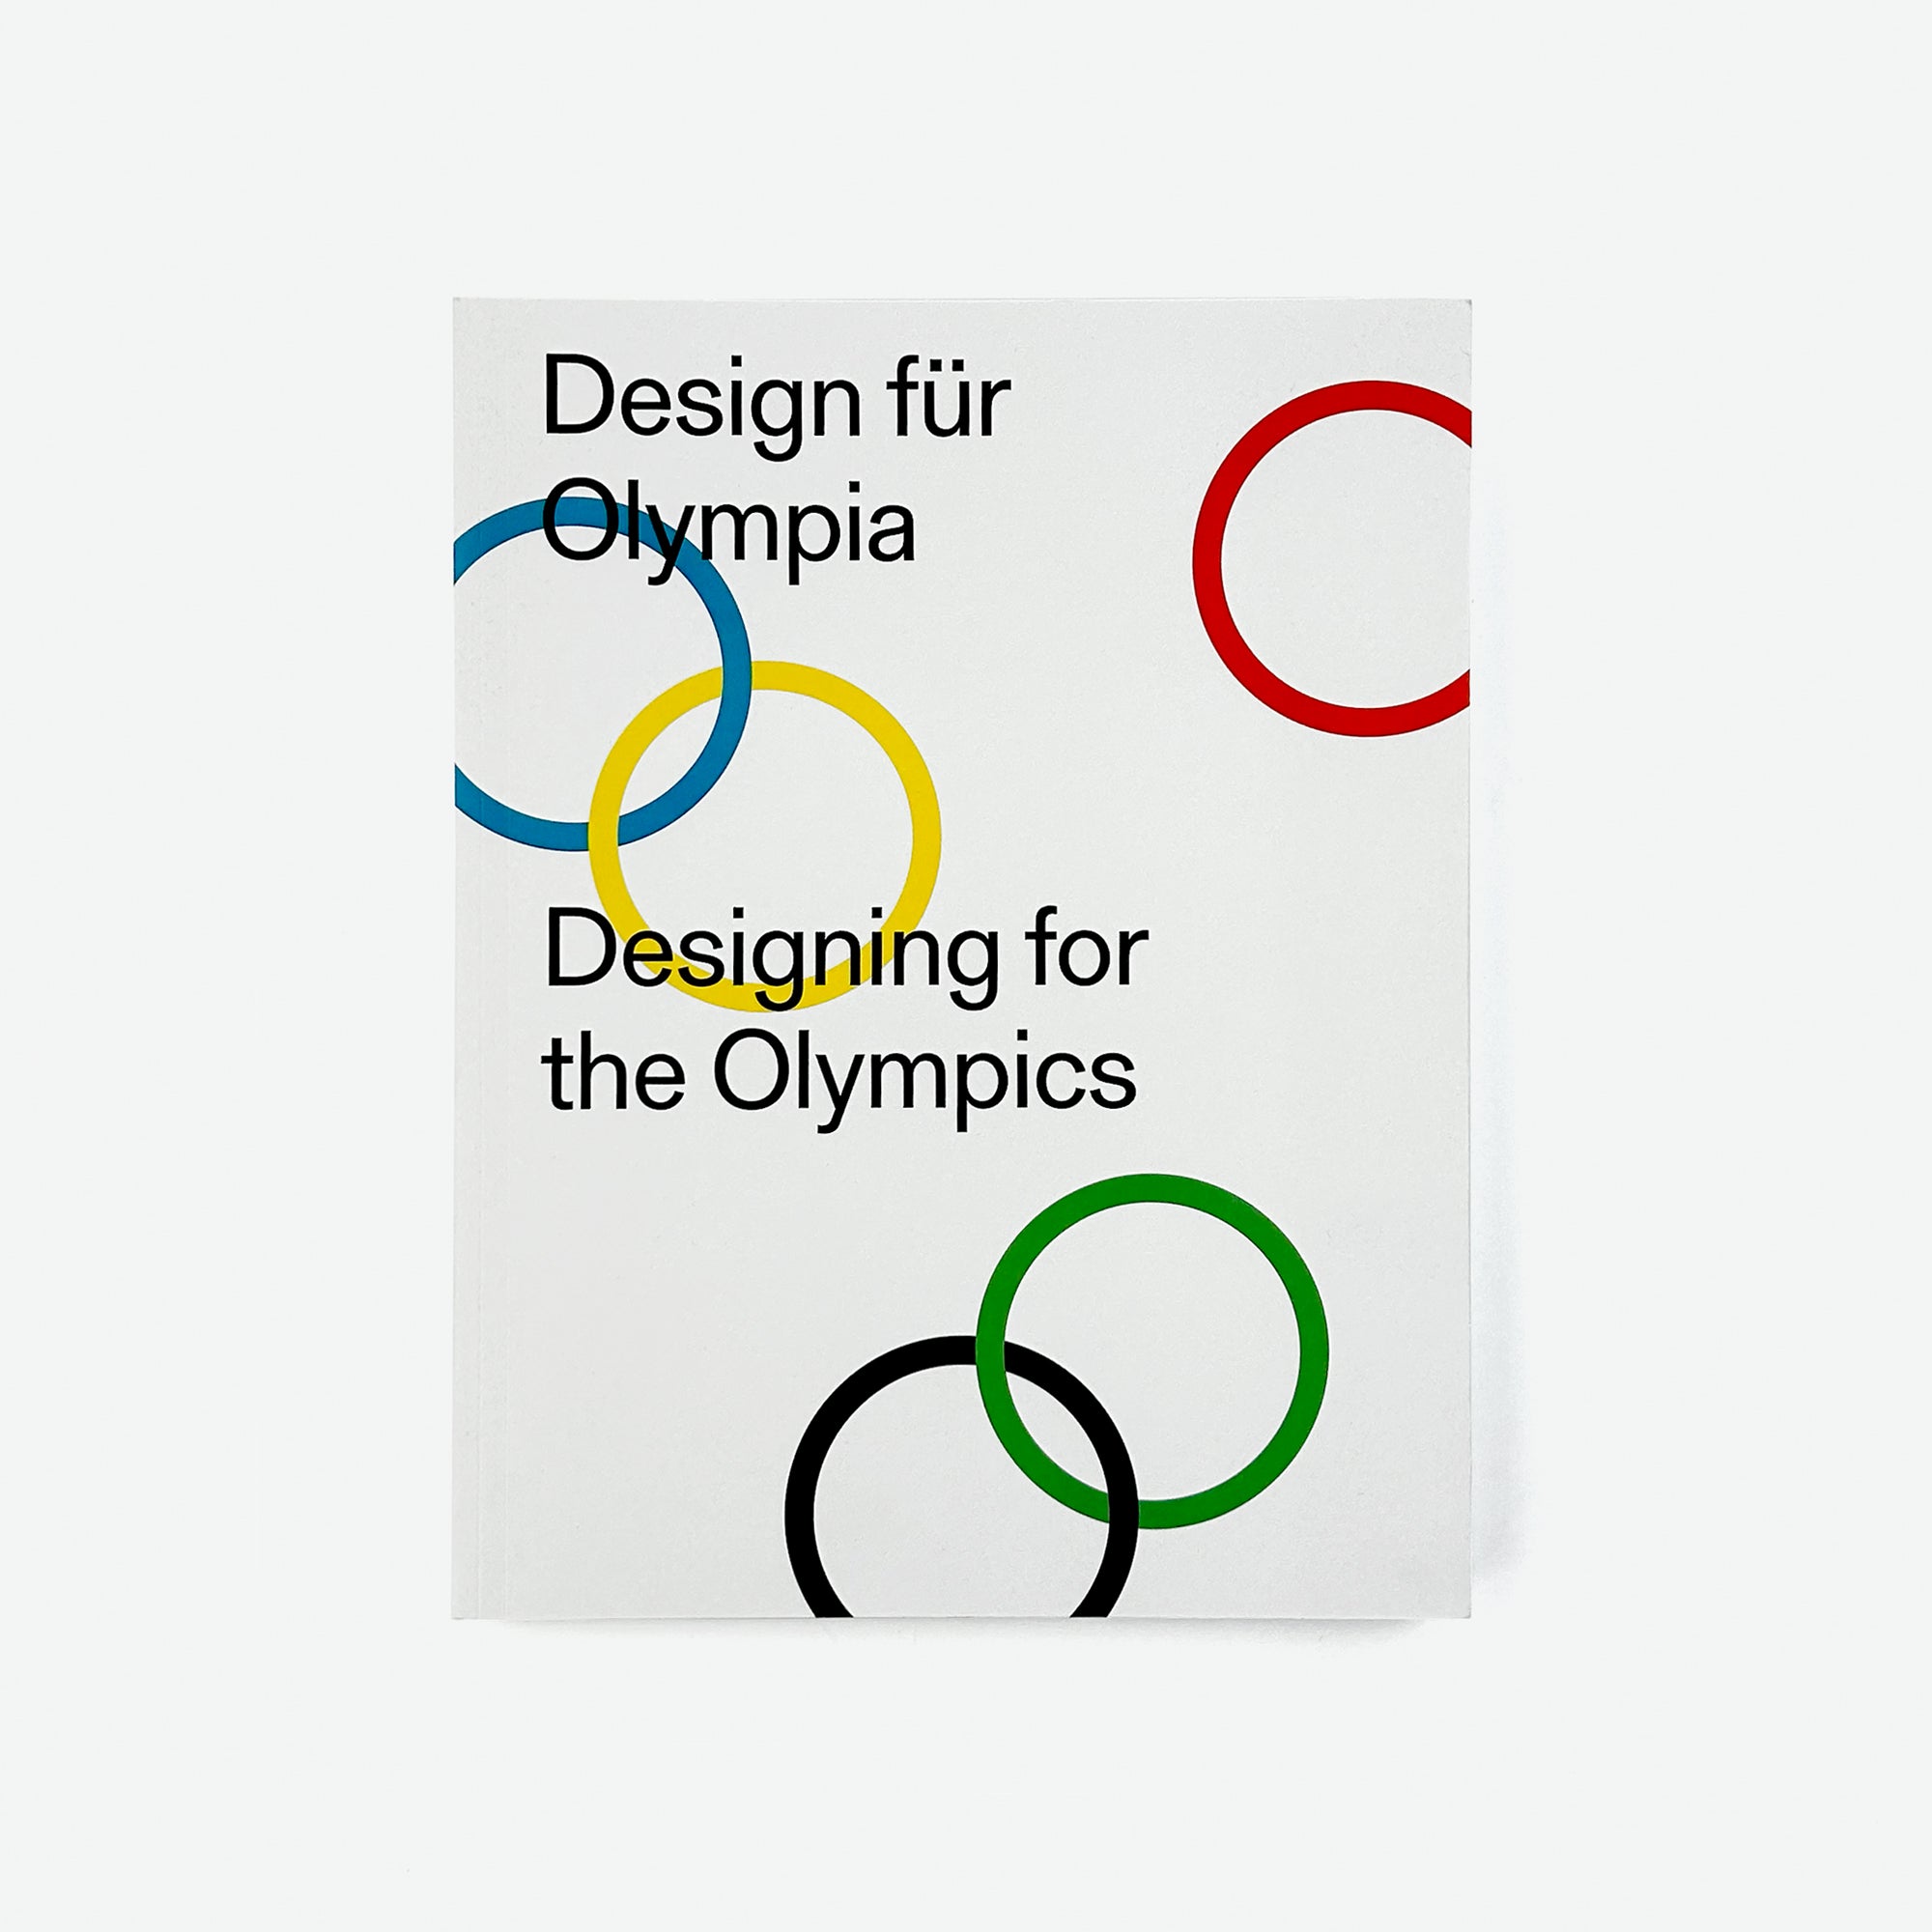 Designing for the Olympics